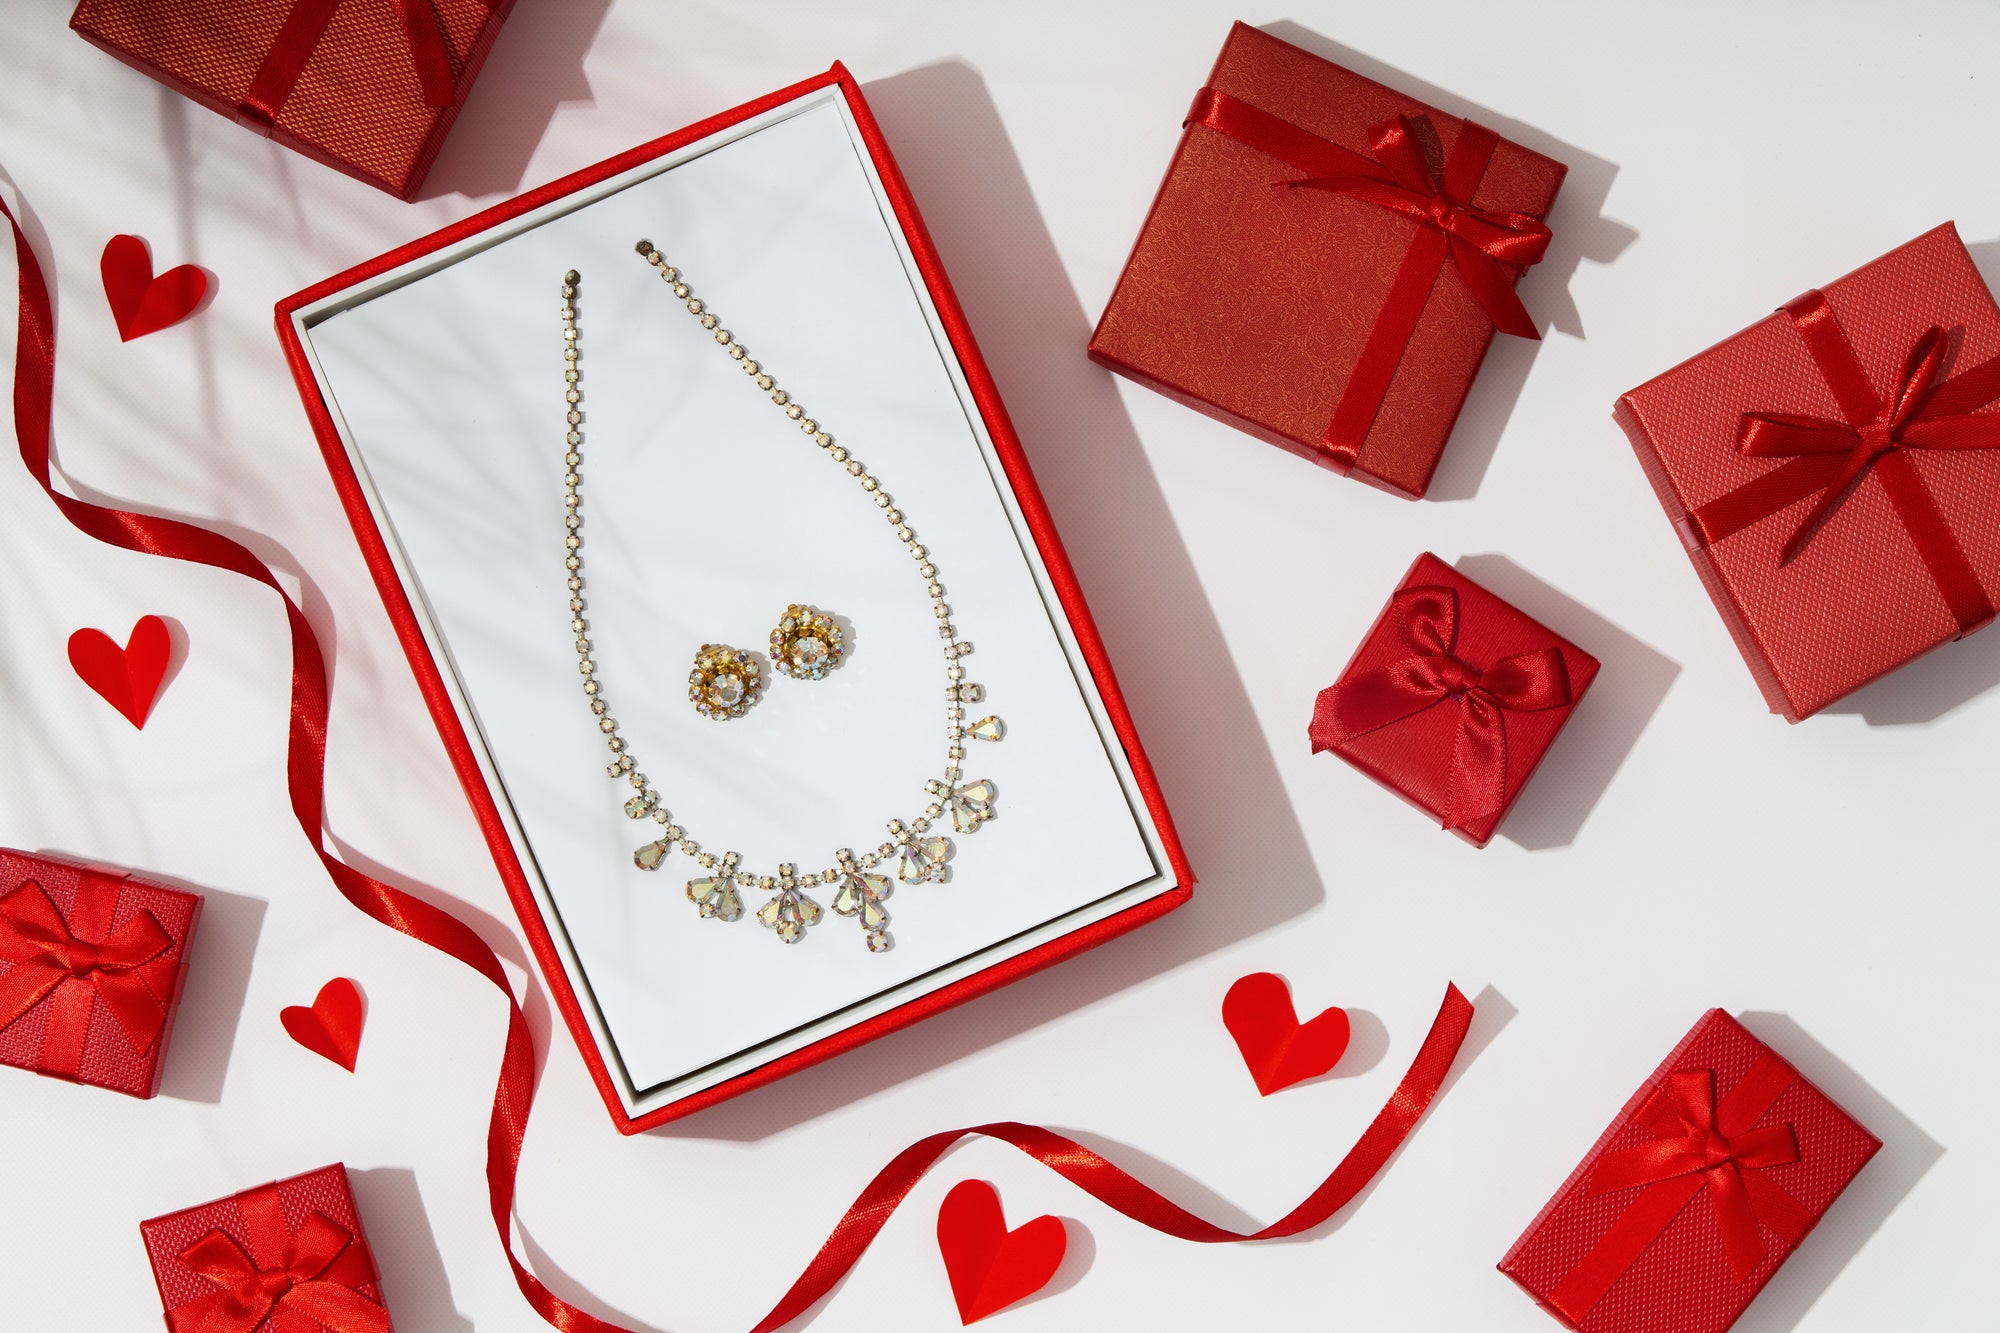 How to Pick the Perfect Jewelry Gift